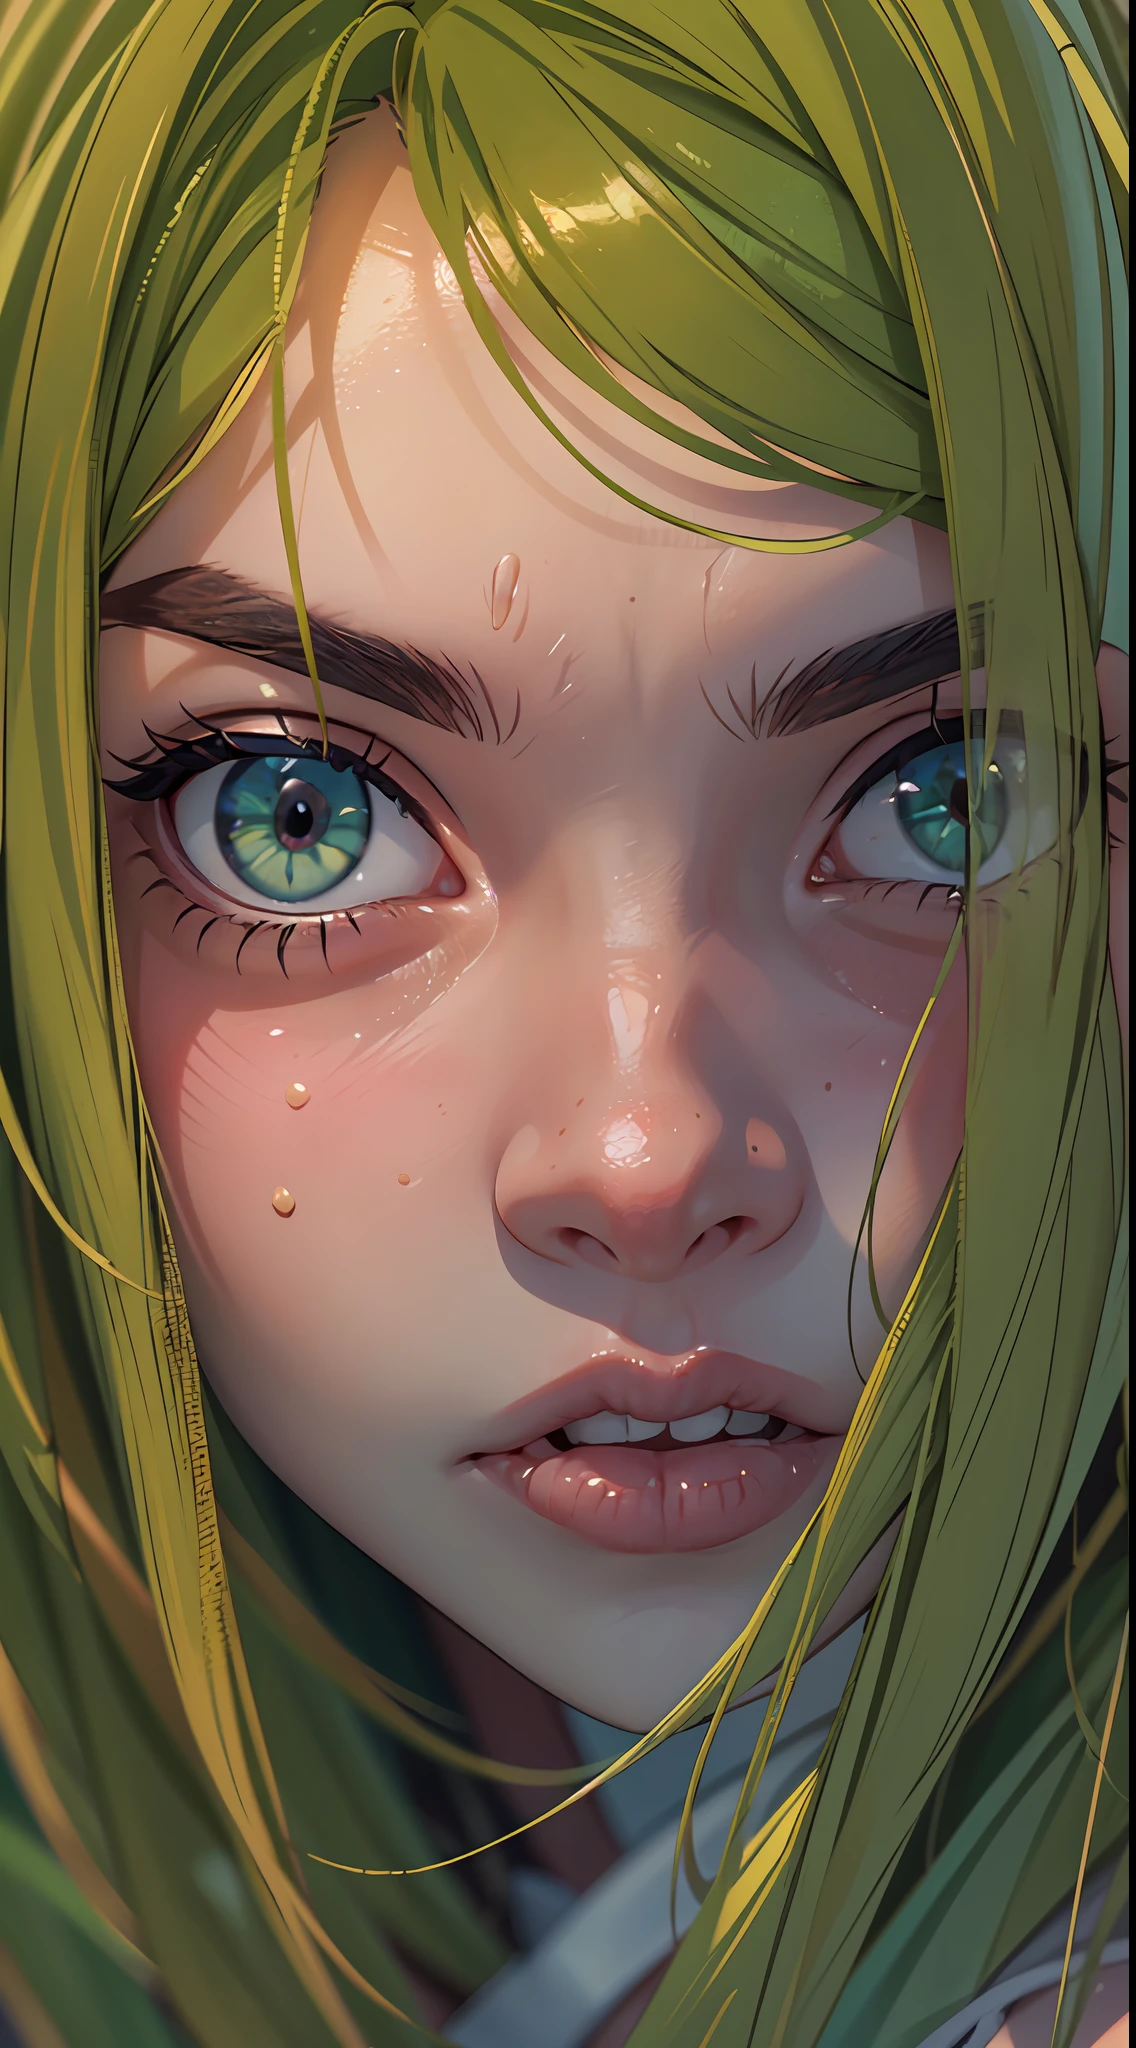 An extremely closeup of a 30 years old girl's face. Her piercing green eyes gaze directly into the camera, drawing the viewer in with their intensity. The faintest hint of a smile tugs at the corner of her lips, revealing a mysterious aura. Her complexion is illuminated with soft, natural light, enhancing her natural beauty. Strands of her dark, lustrous hair frame her face, adding a touch of elegance to the shot. The image captures a moment of vulnerability and strength, evoking curiosity about the stories hidden behind those eyes. Photo taken by Rankin with a Sony Alpha 1, Studio lighting, and Colored gels, 8K, Ultra-HD, Super-Resolution.